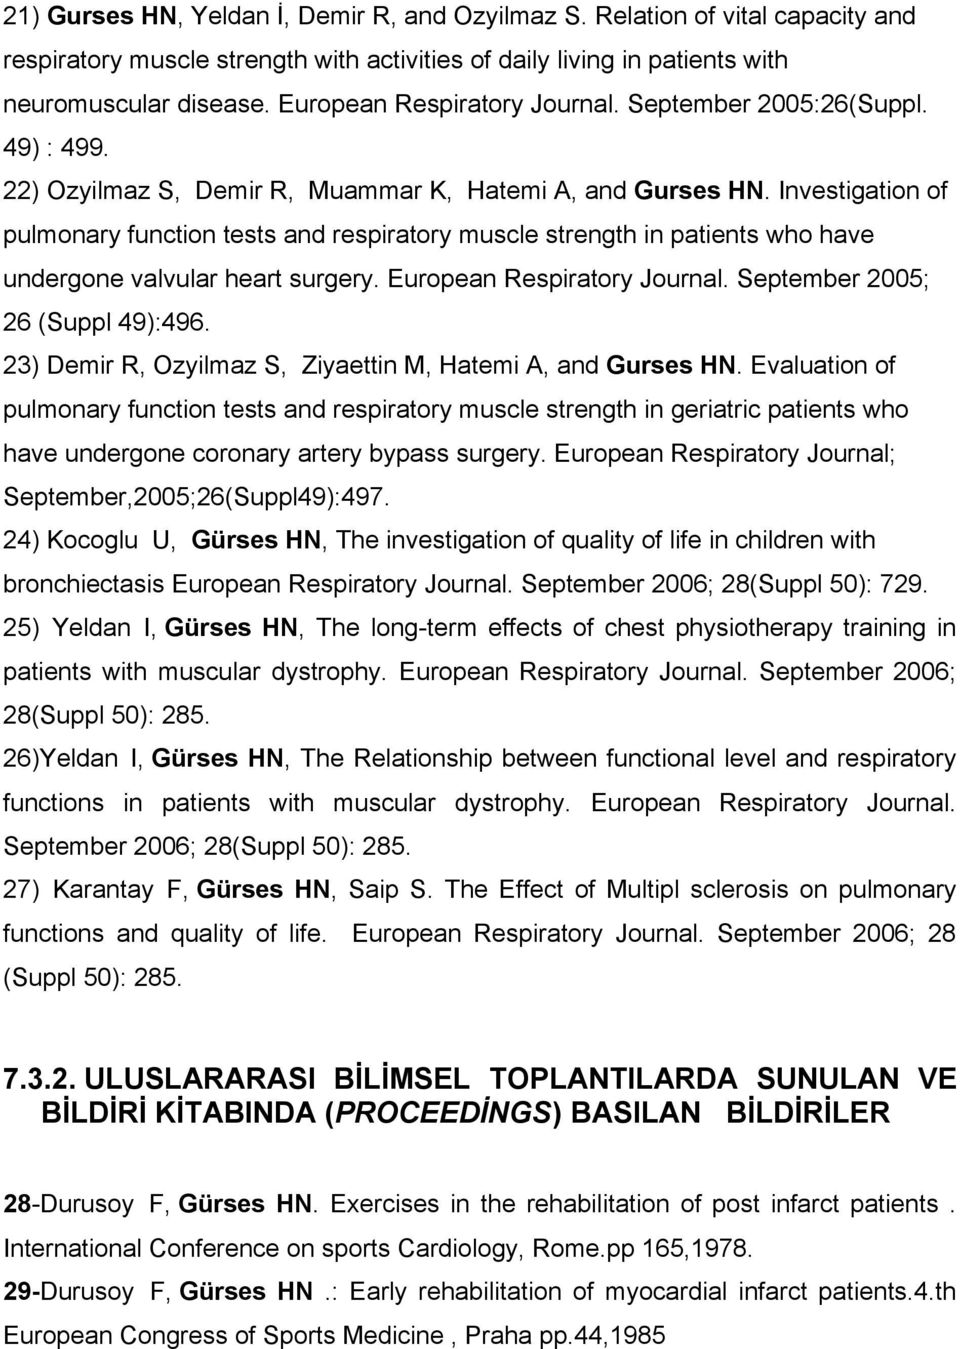 Investigation of pulmonary function tests and respiratory muscle strength in patients who have undergone valvular heart surgery. European Respiratory Journal. September 2005; 26 (Suppl 49):496.